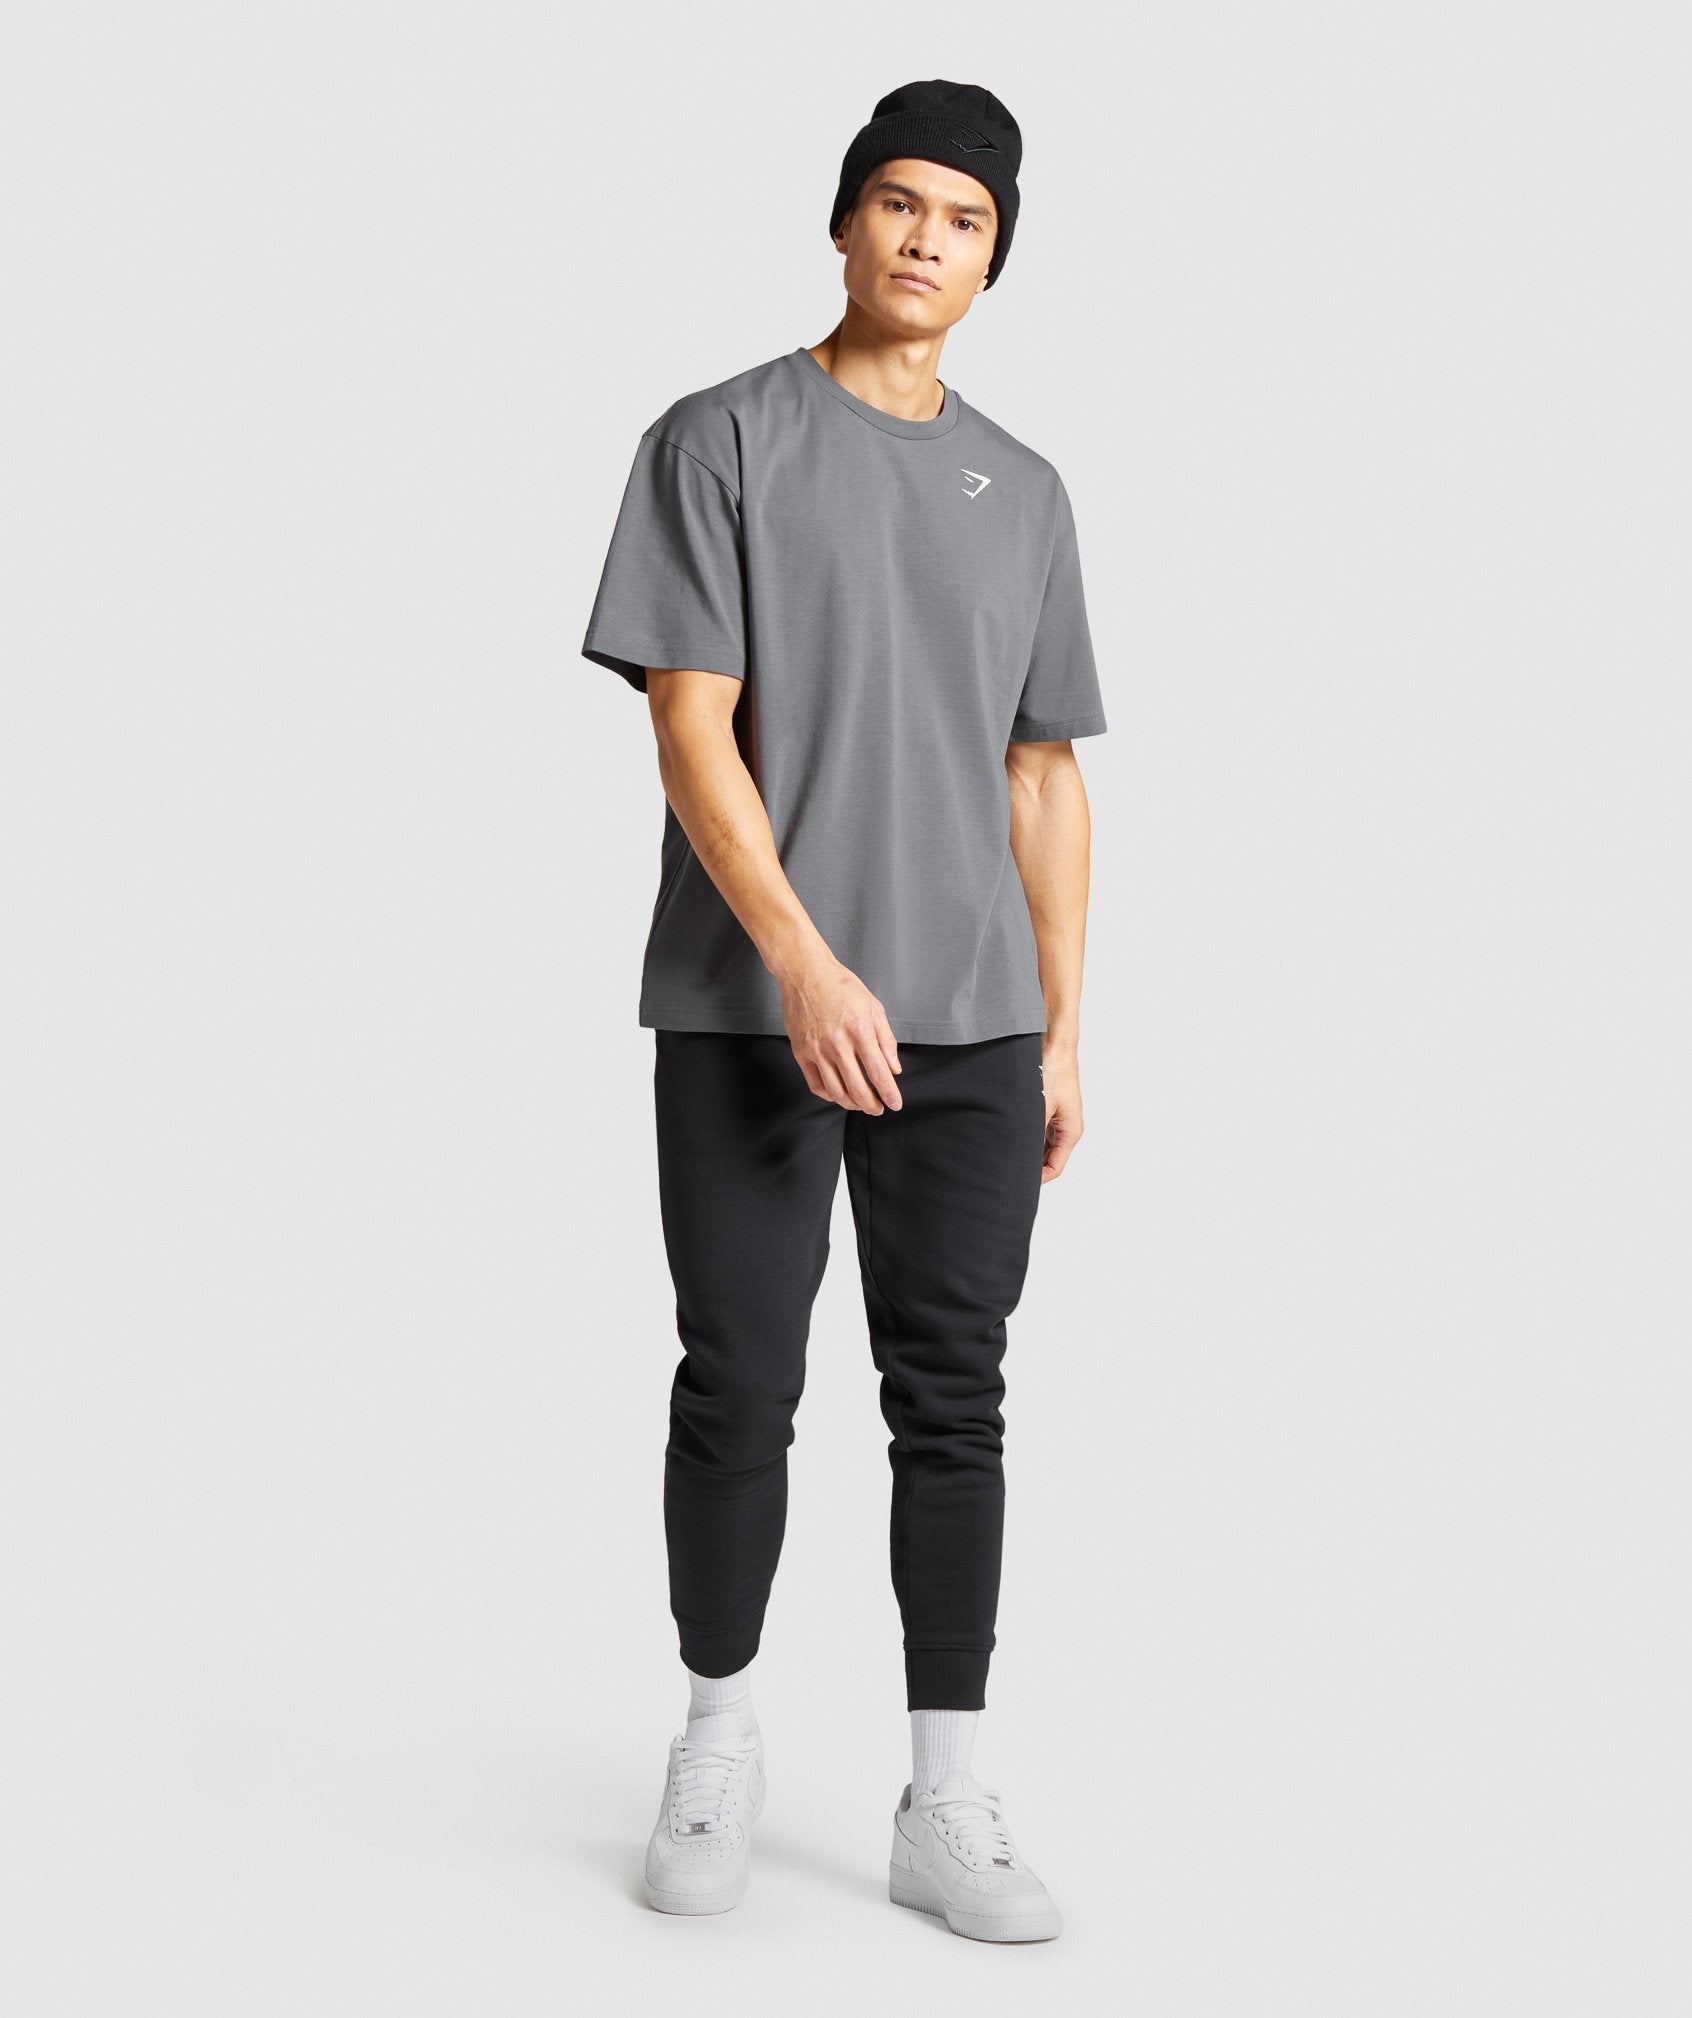 Essential Oversized T-Shirt in Charcoal - view 4